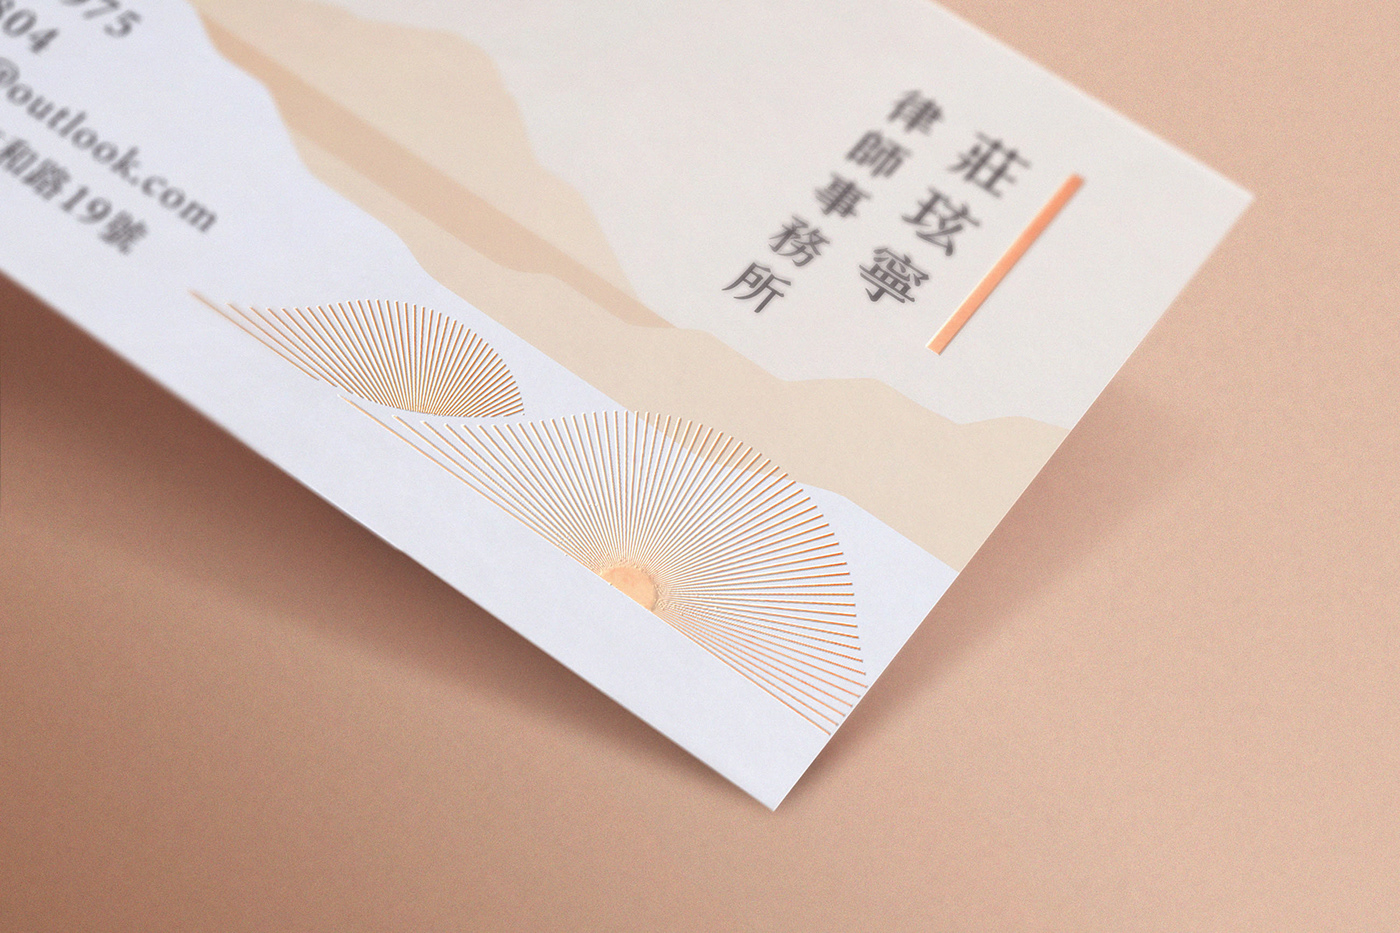 business card Business card design card Hot Foil Hot Foil Stamping Law Office lawyer Name card 名片設計 燙金